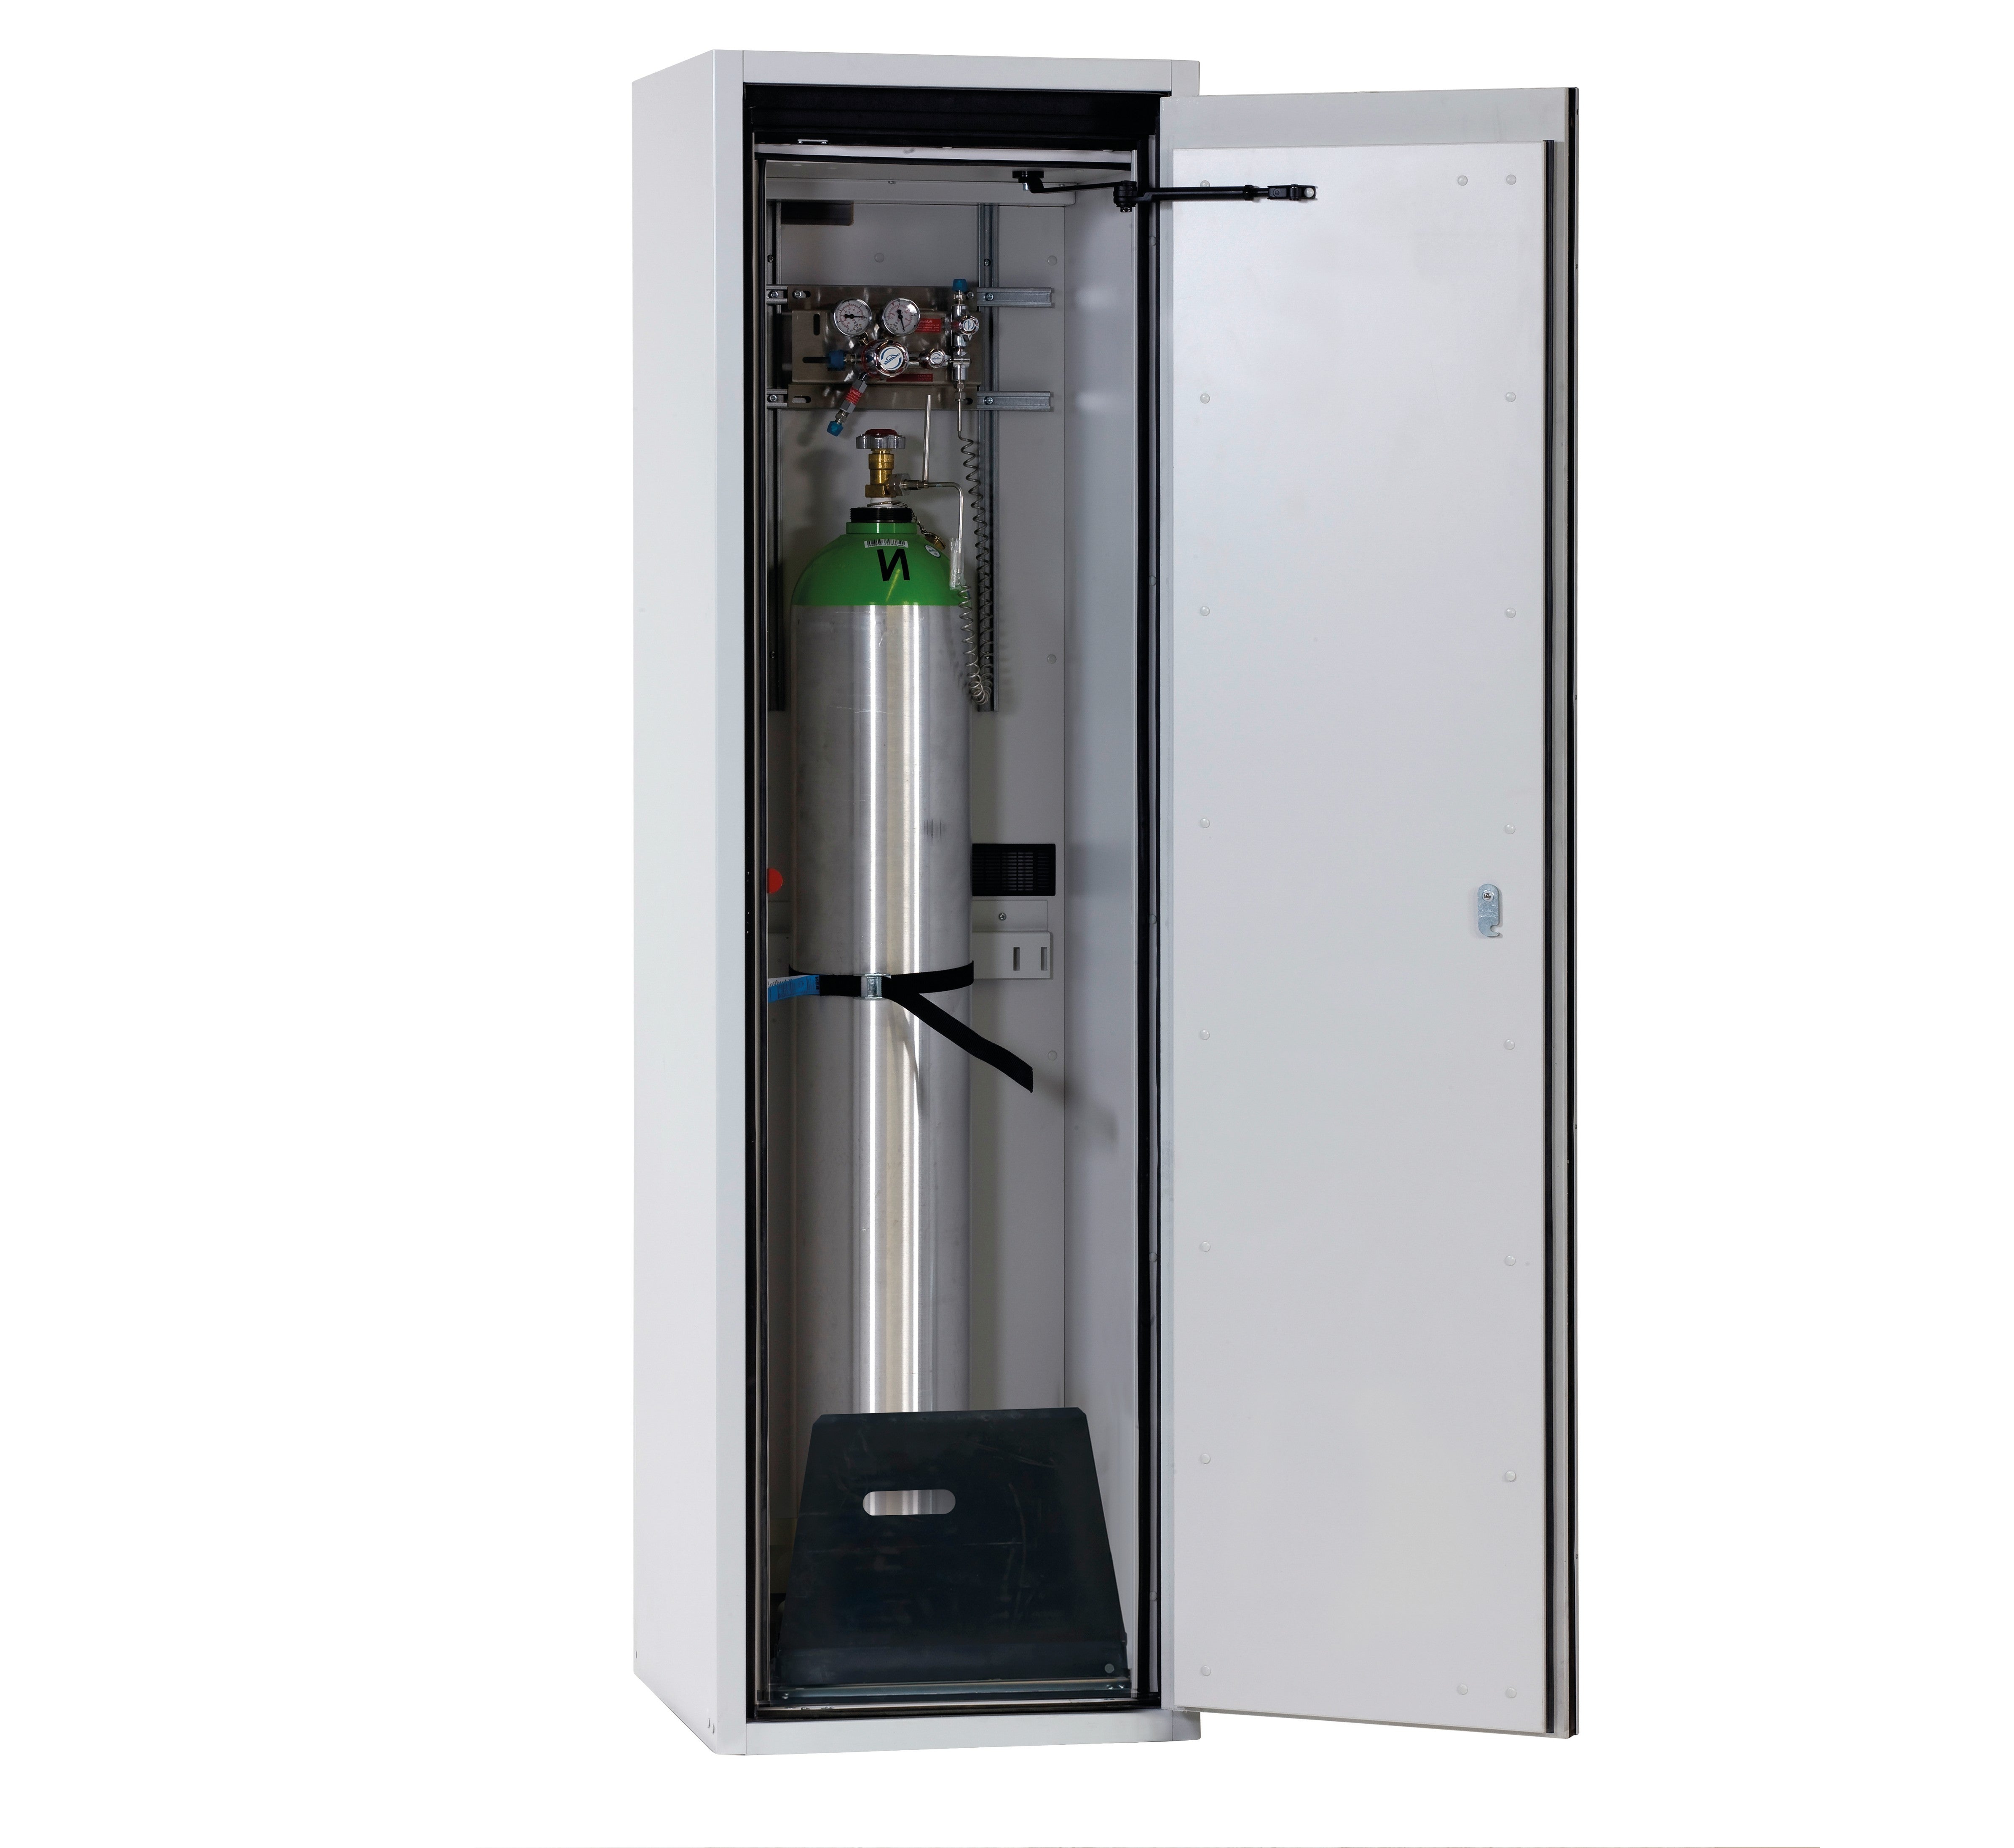 Type 90 compressed gas bottle cabinet G-ULTIMATE-90 model G90.205.060.R in light gray RAL 7035 with standard interior fittings for 1x compressed gas bottles of 50 liters each